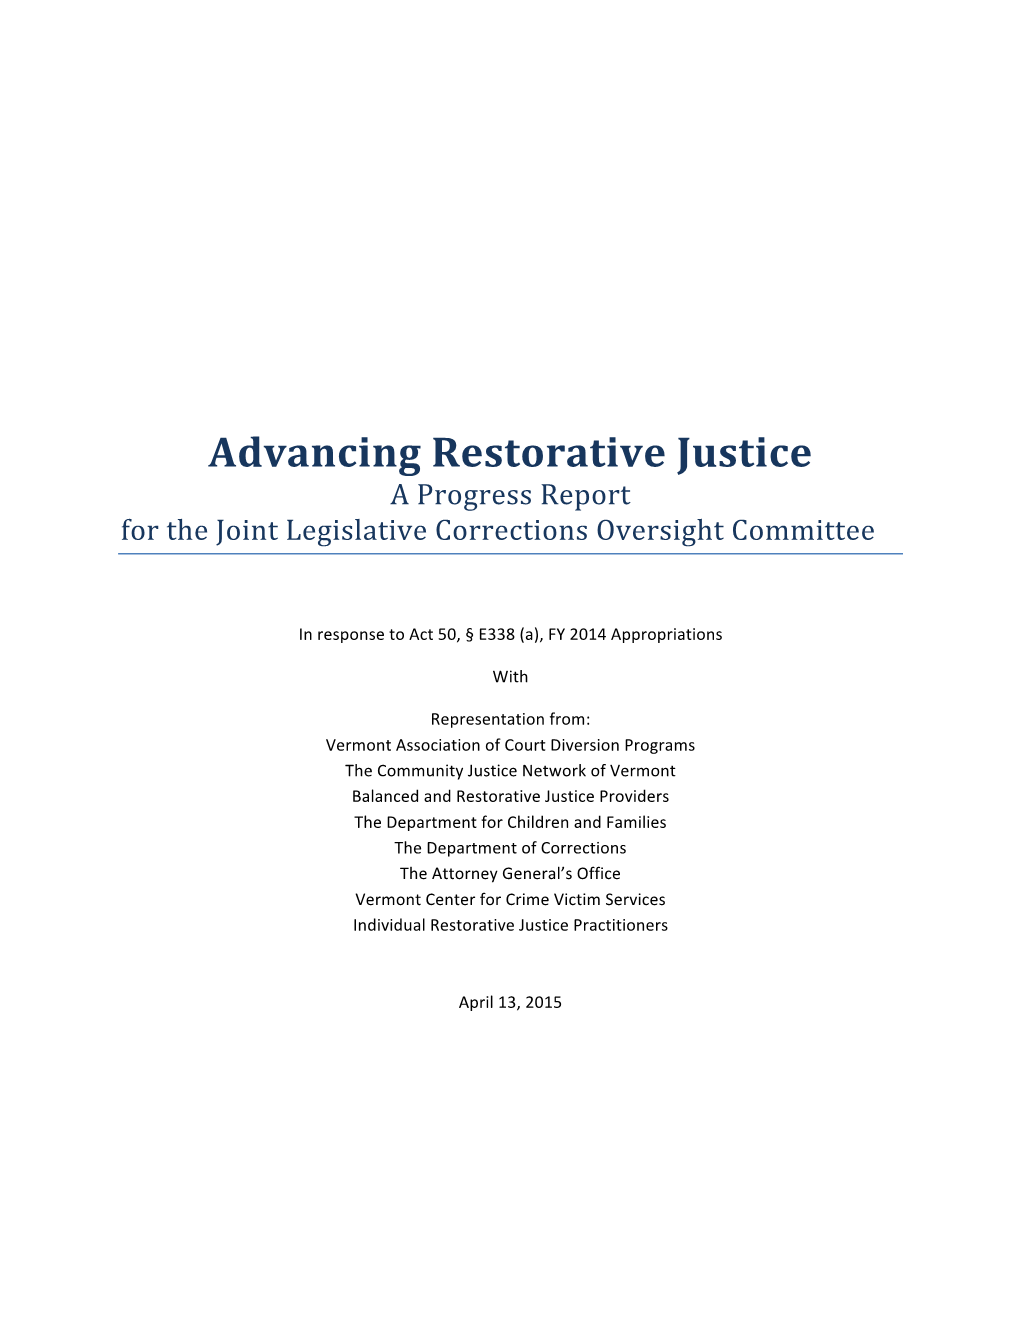 Advancing Restorative Justice a Progress Report for the Joint Legislative Corrections Oversight Committee